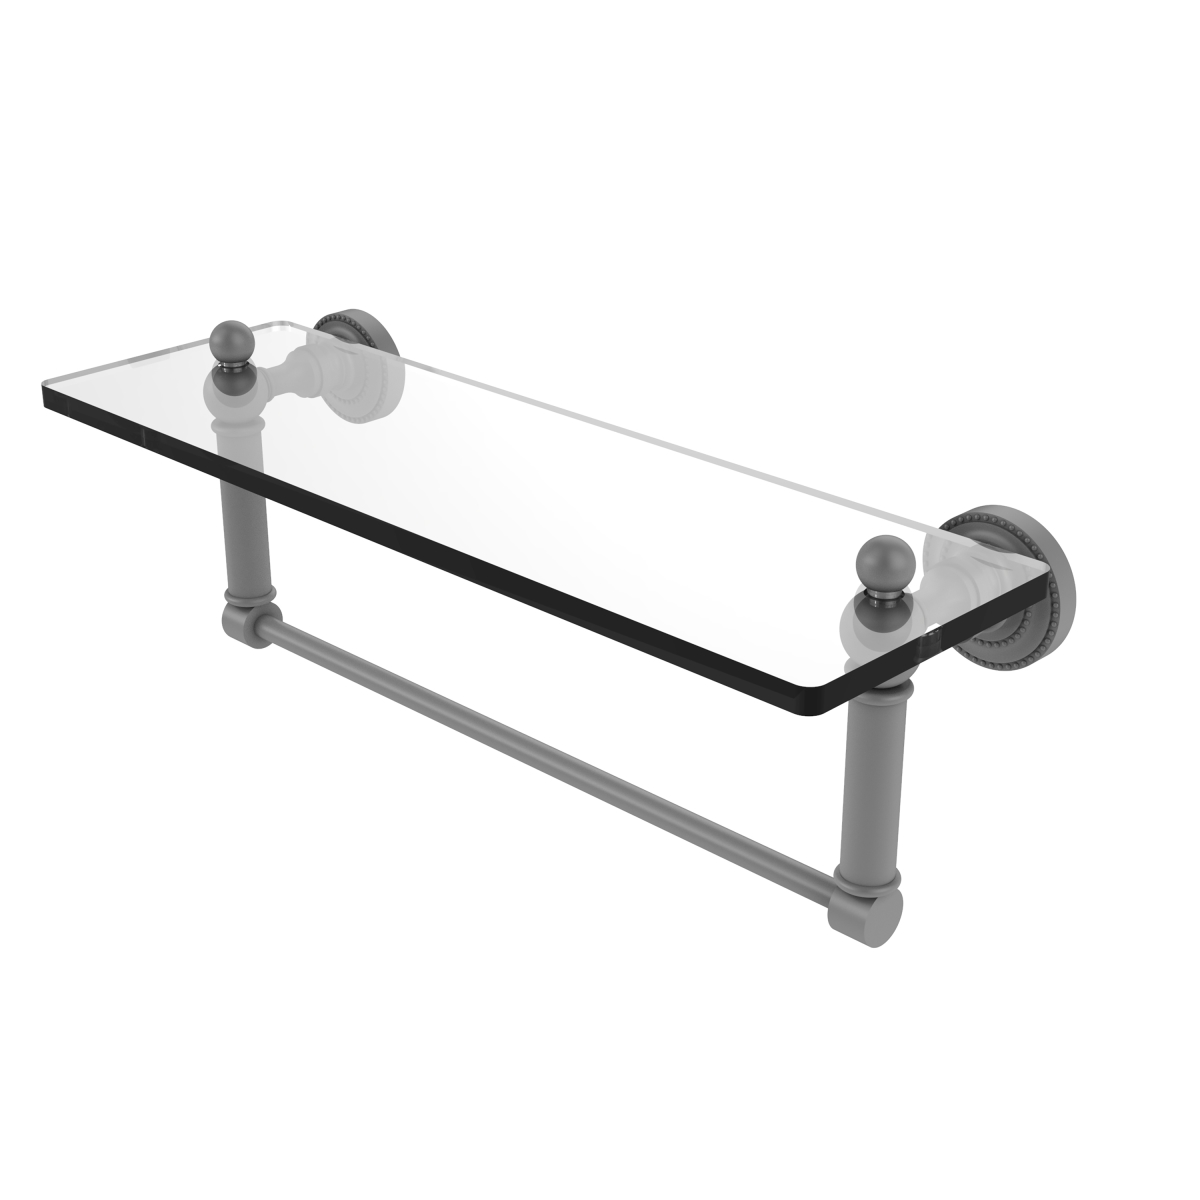 Picture of Allied Brass DT-1TB-16-GYM 16 in. Dottingham Glass Vanity Shelf with Integrated Towel Bar, Matte Gray